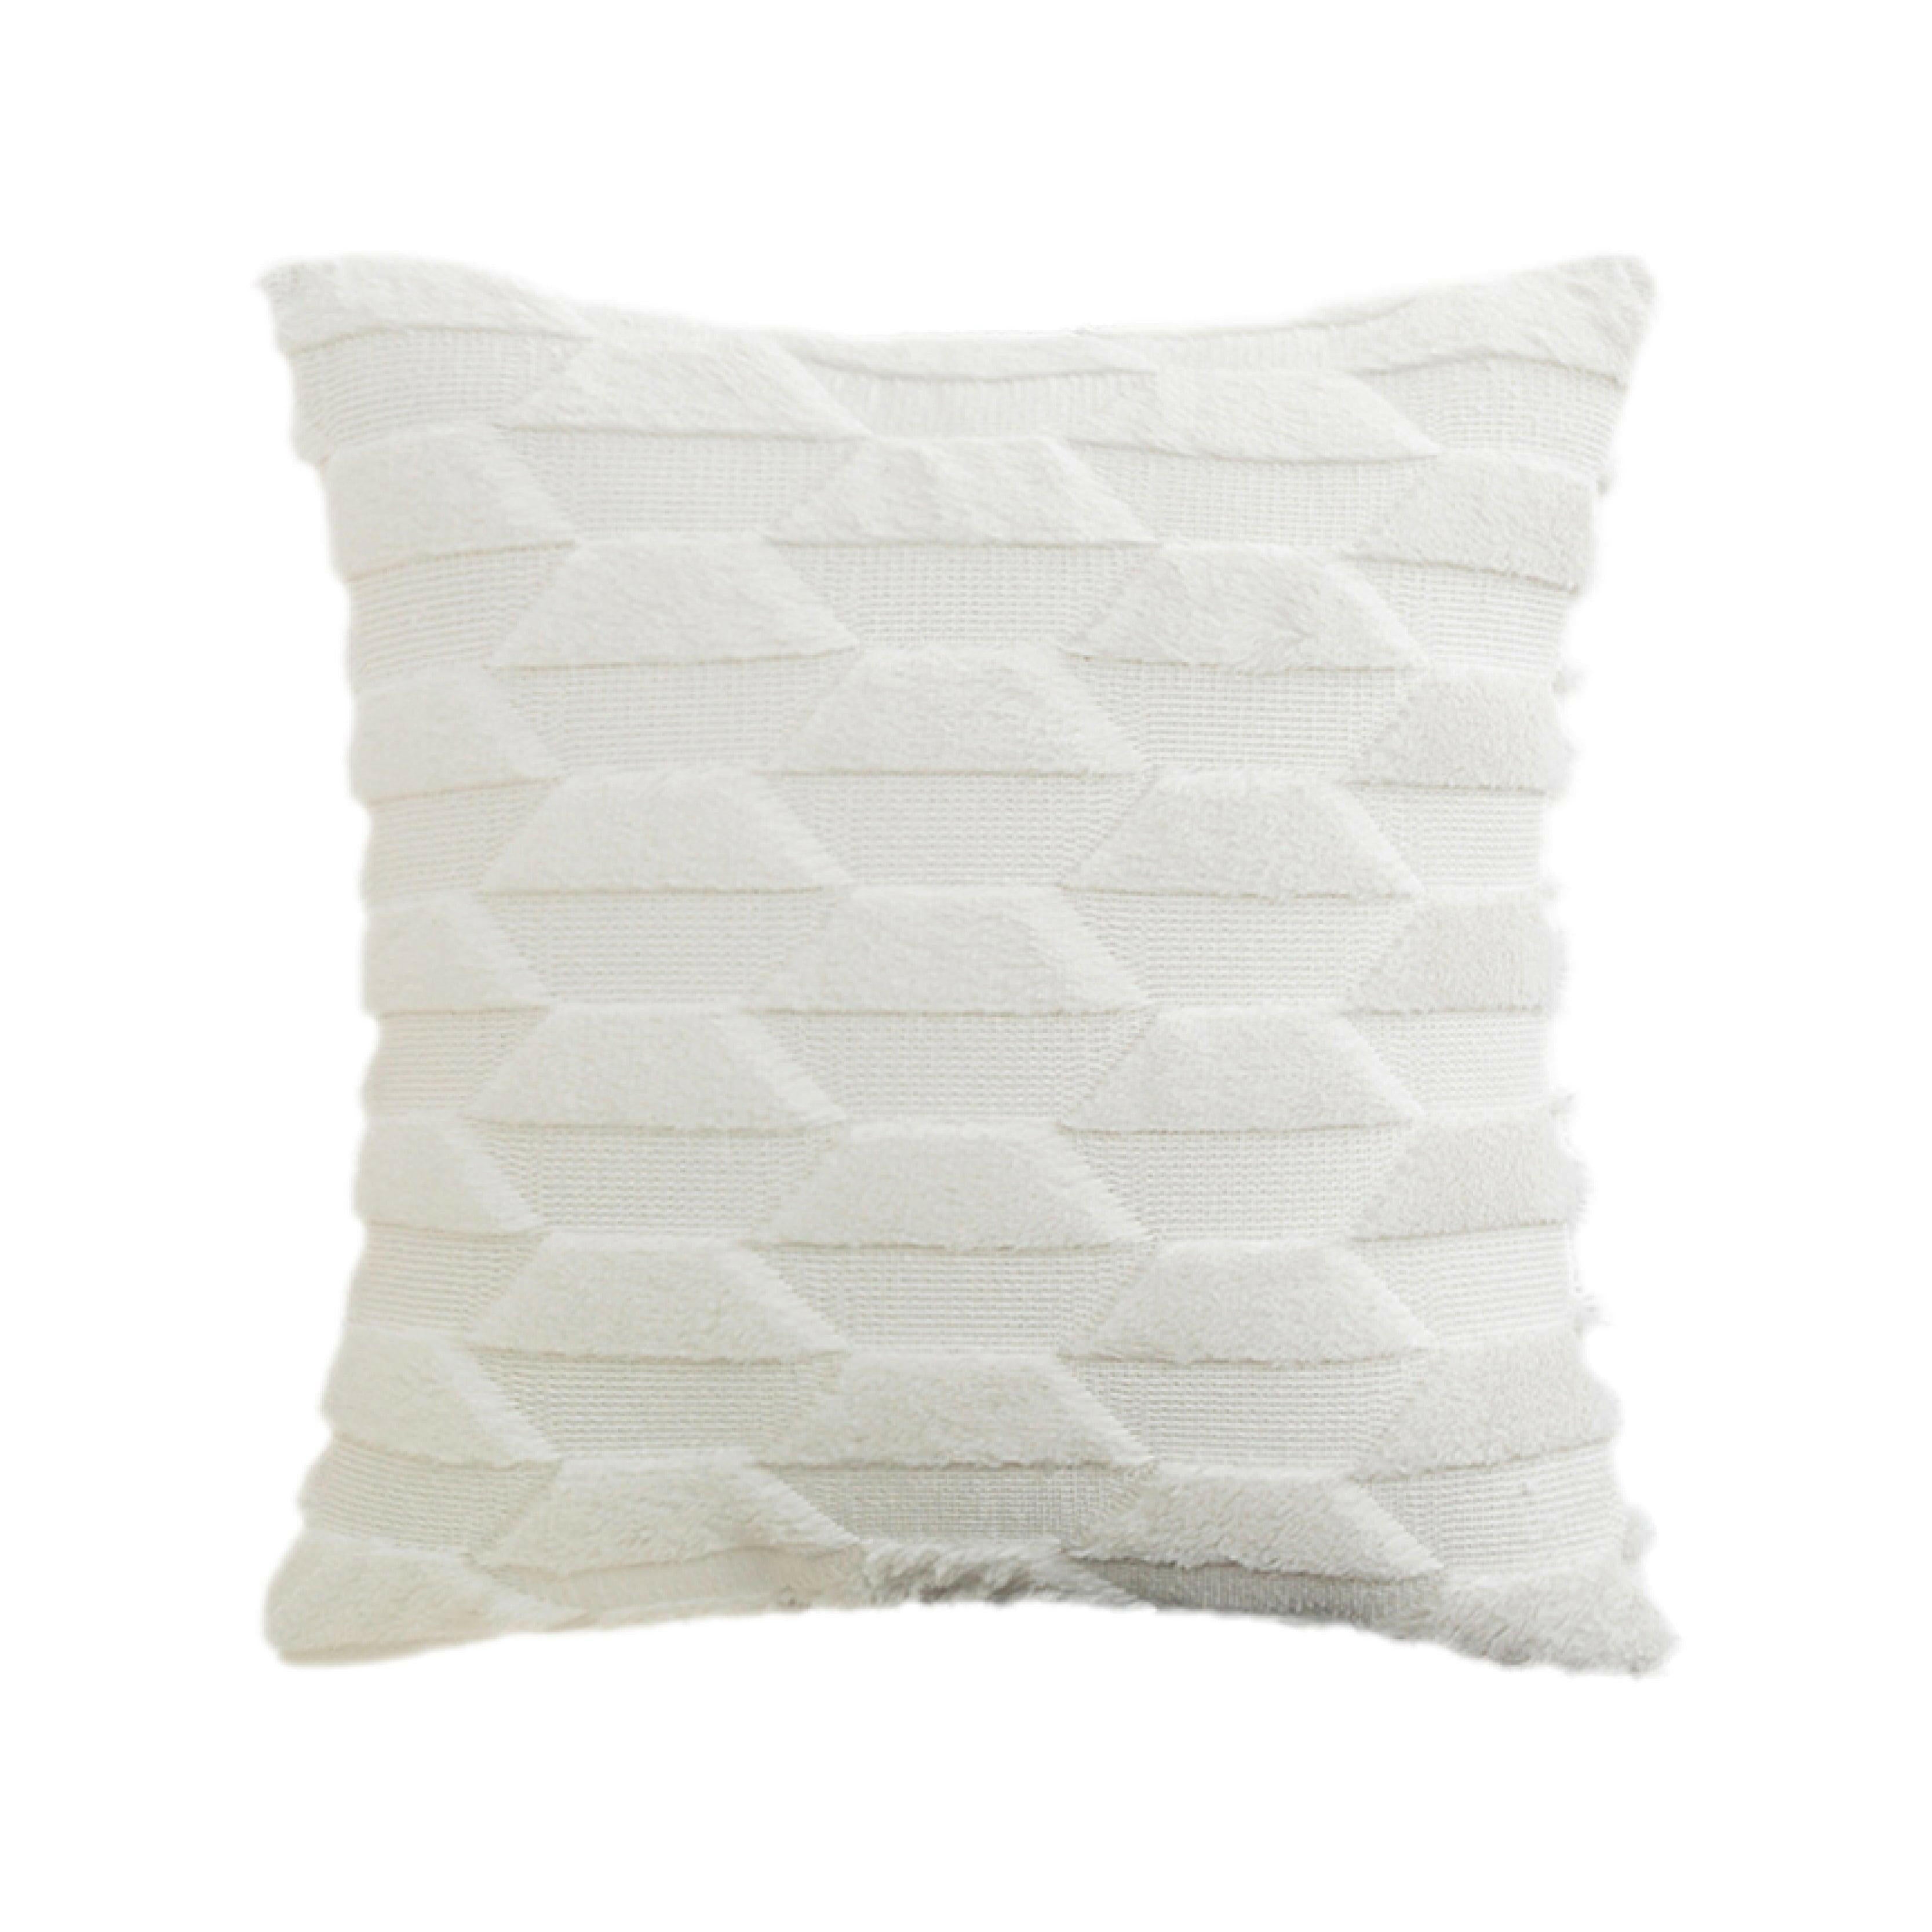 Hyper Cover Trapezoid Tufted Faux Fur Cushion Covers | Cushion Covers | Brilliant Home Living